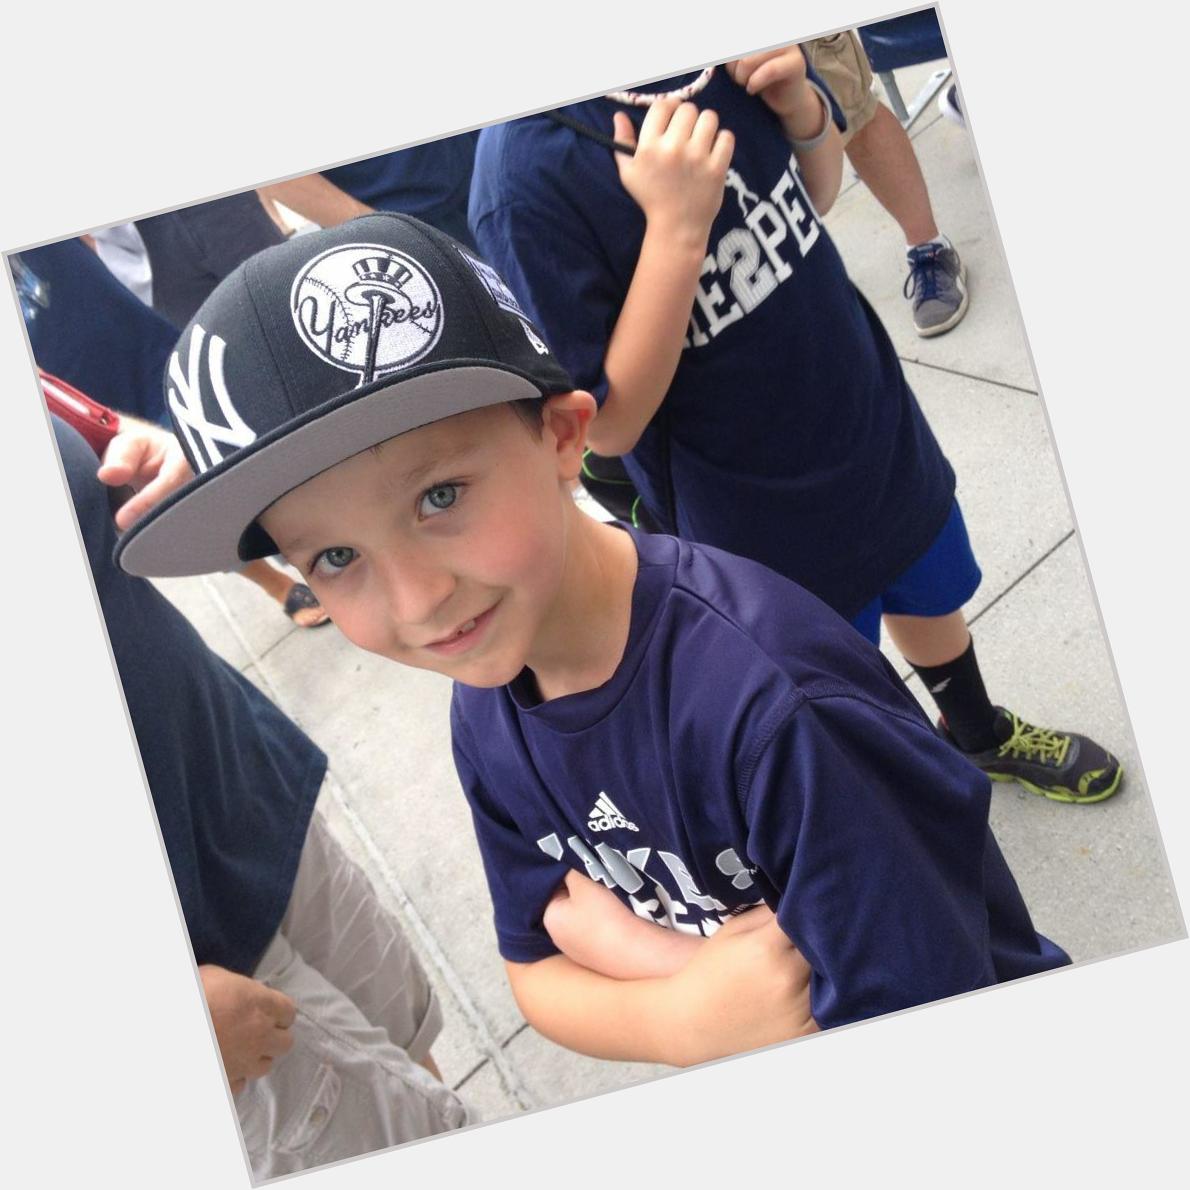 Shouting happy birthday to Brian Cashman from his favorite fan Gavin...always my hero...thanks for the Tampa tix.. 